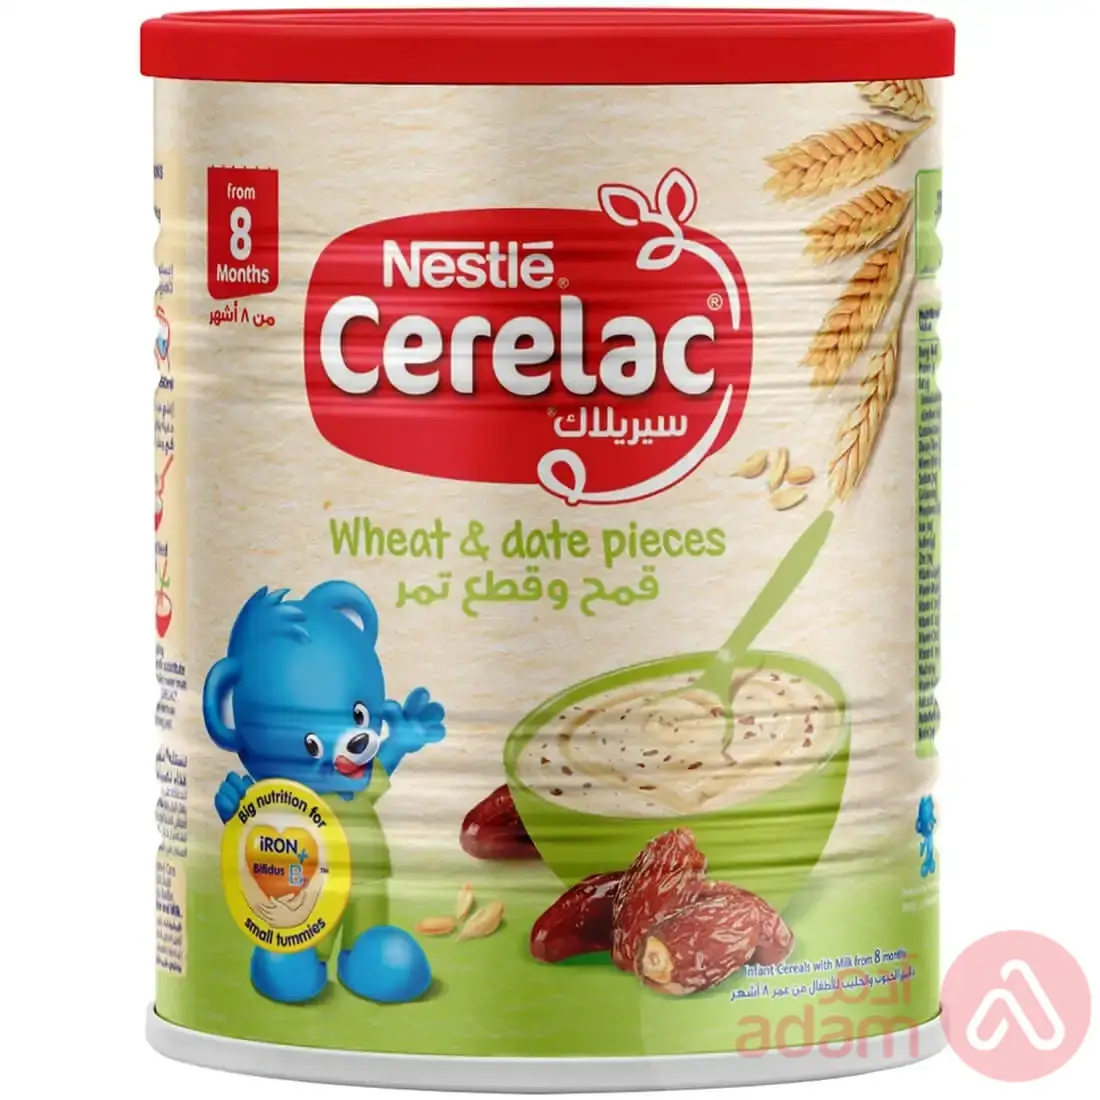 Cerelac Infant Cereals With Iron + Wheat & Date Pieces From 8 Months | 1Kg